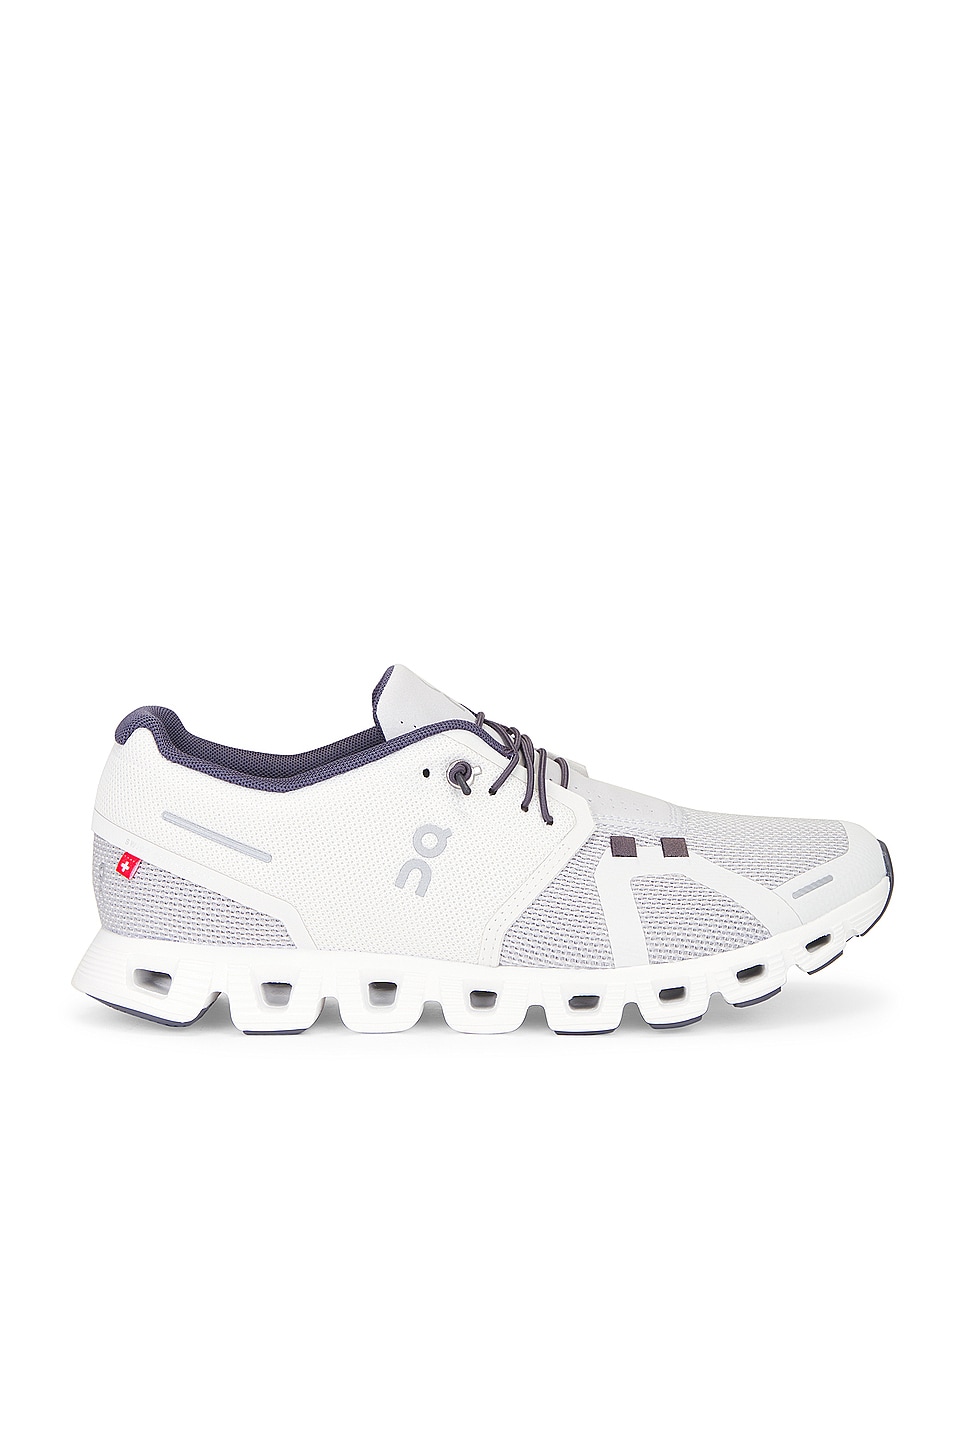 Image 1 of On Cloud 5 Combo Sneaker in Ice & Glacier